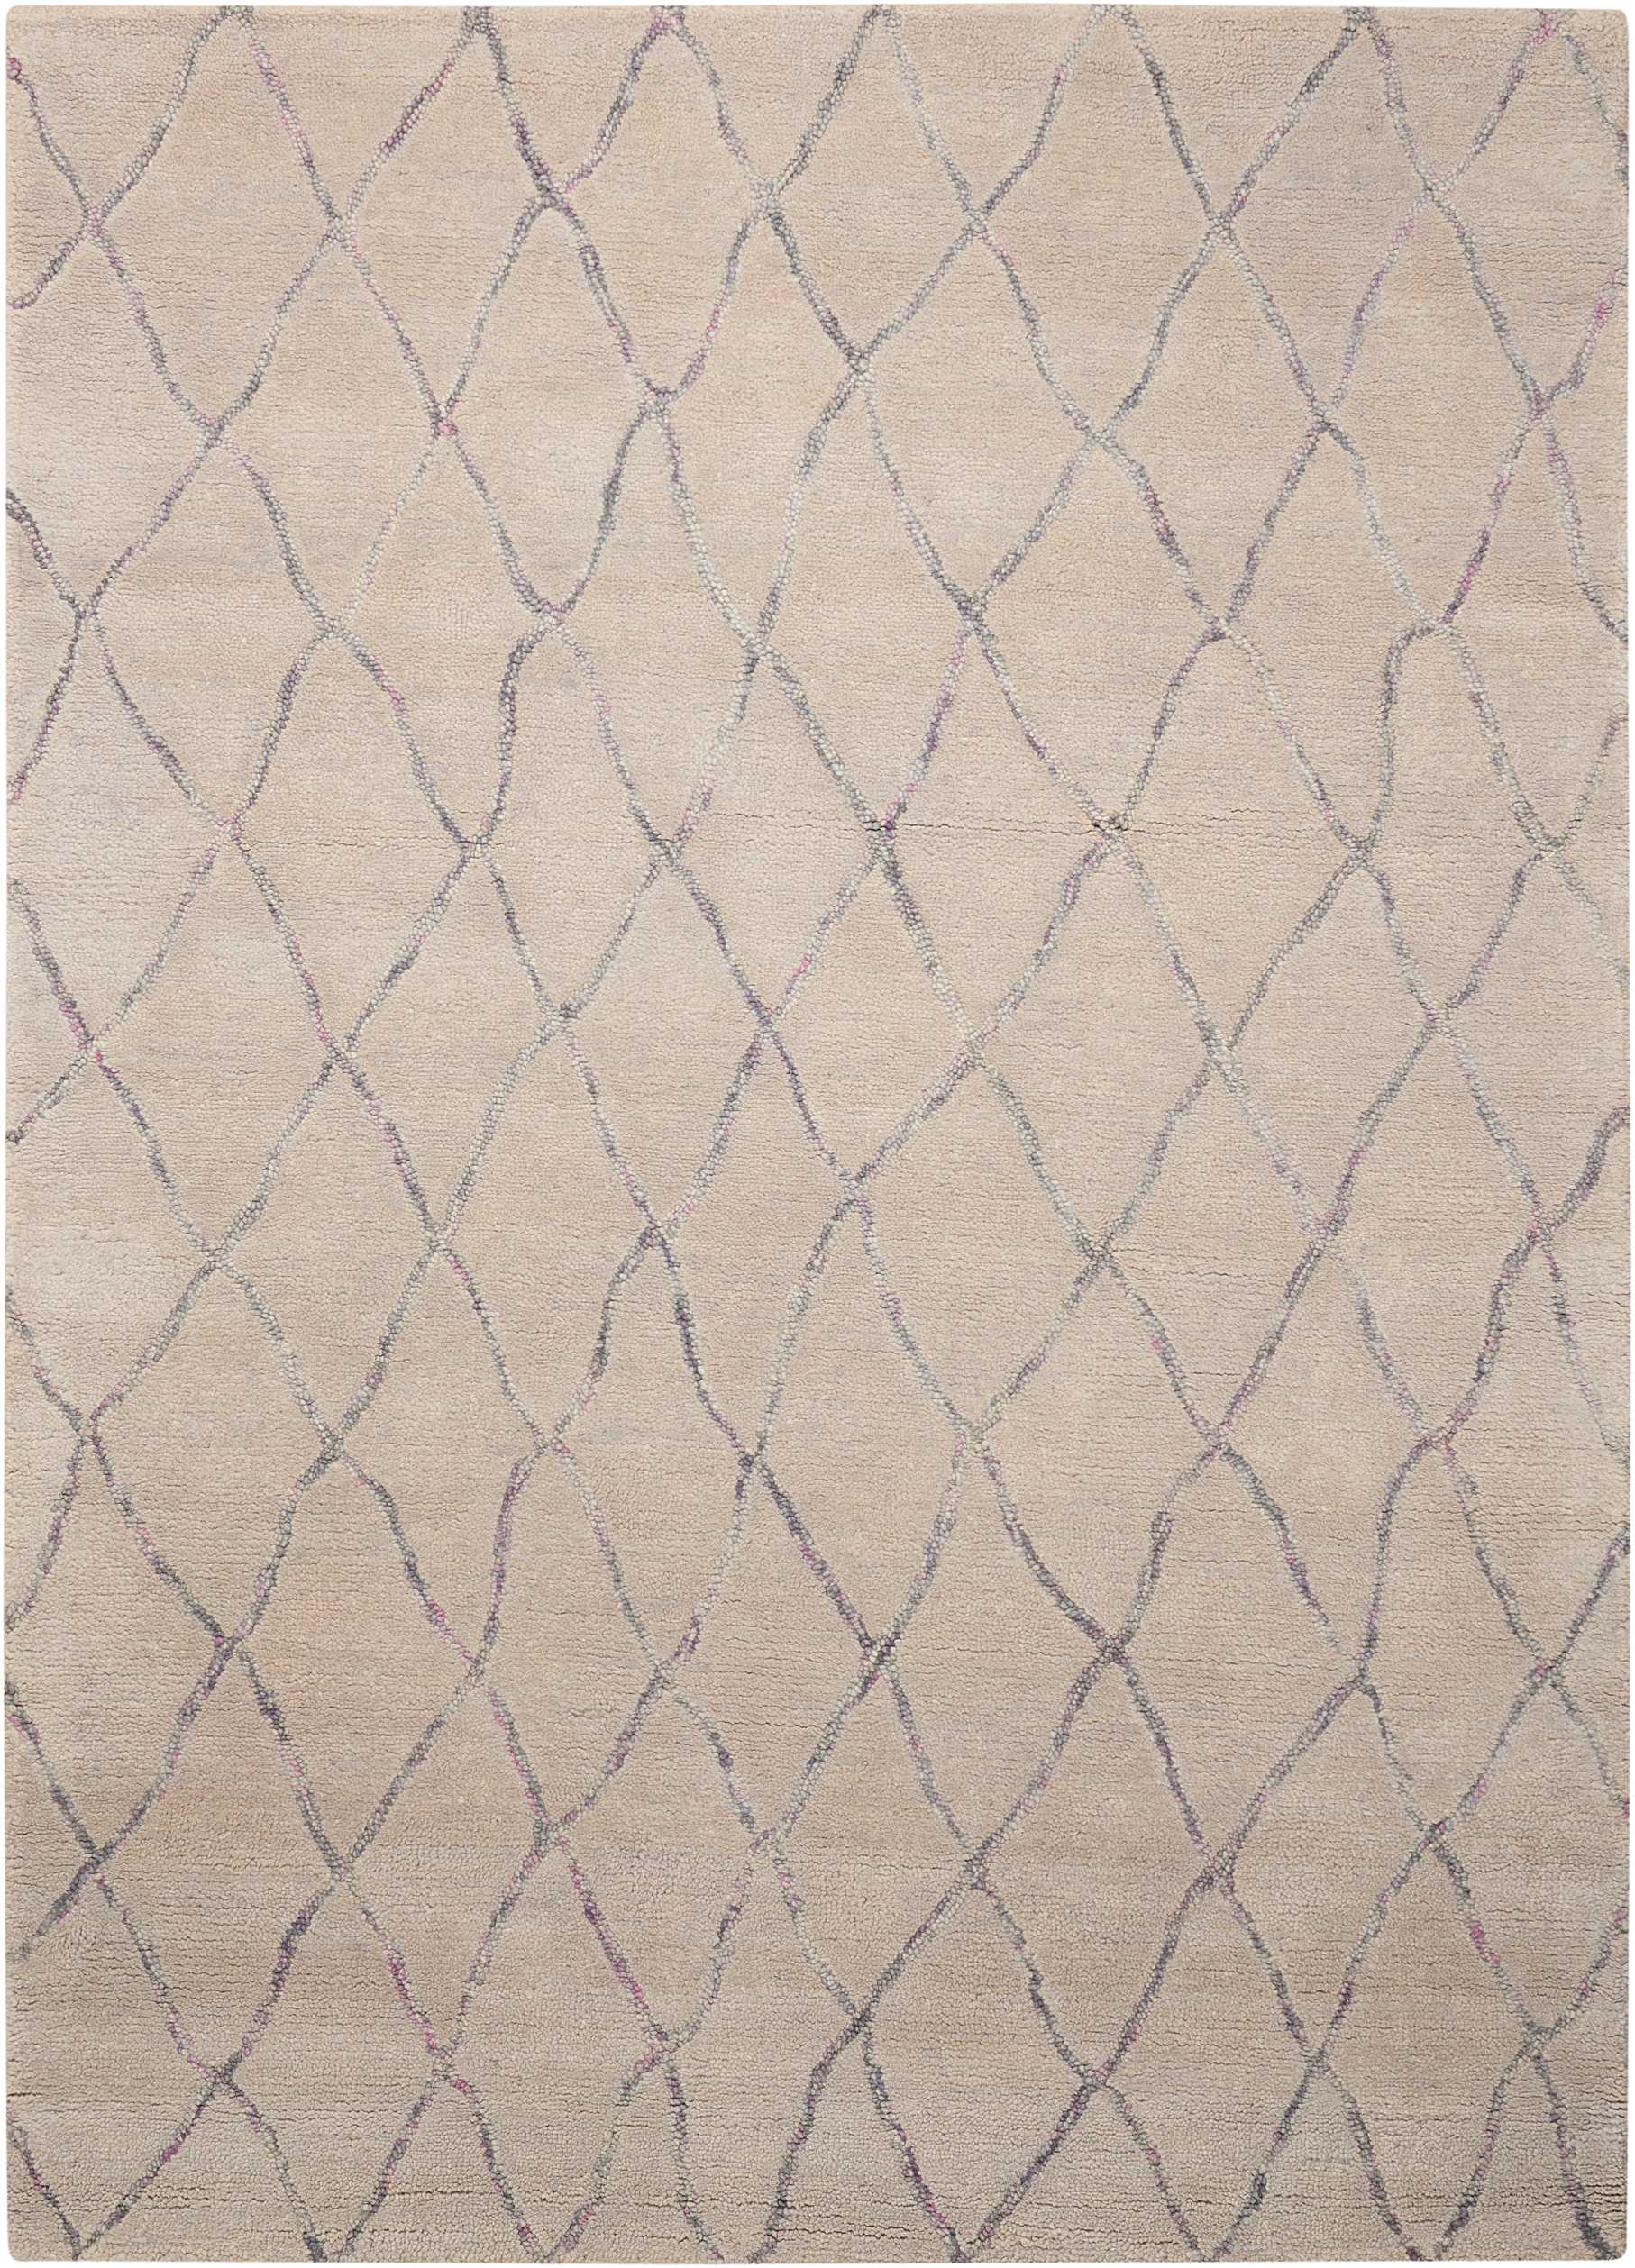 Barclay Butera Intermix Driftwood Area Rug by Nourison